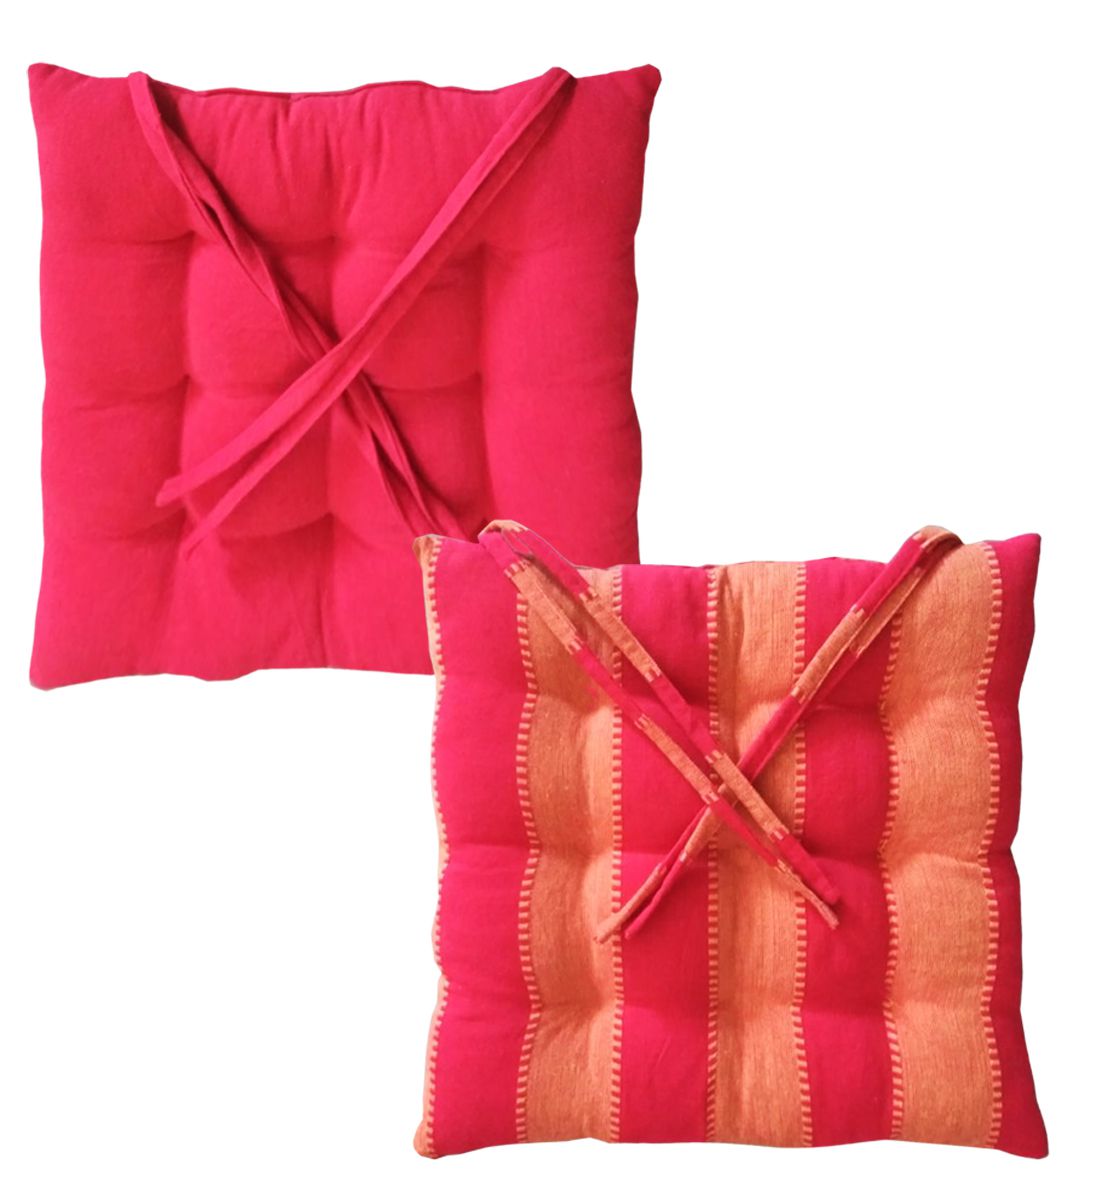     			SBN New Life Style Set of 2 Red Cotton Chair Pads